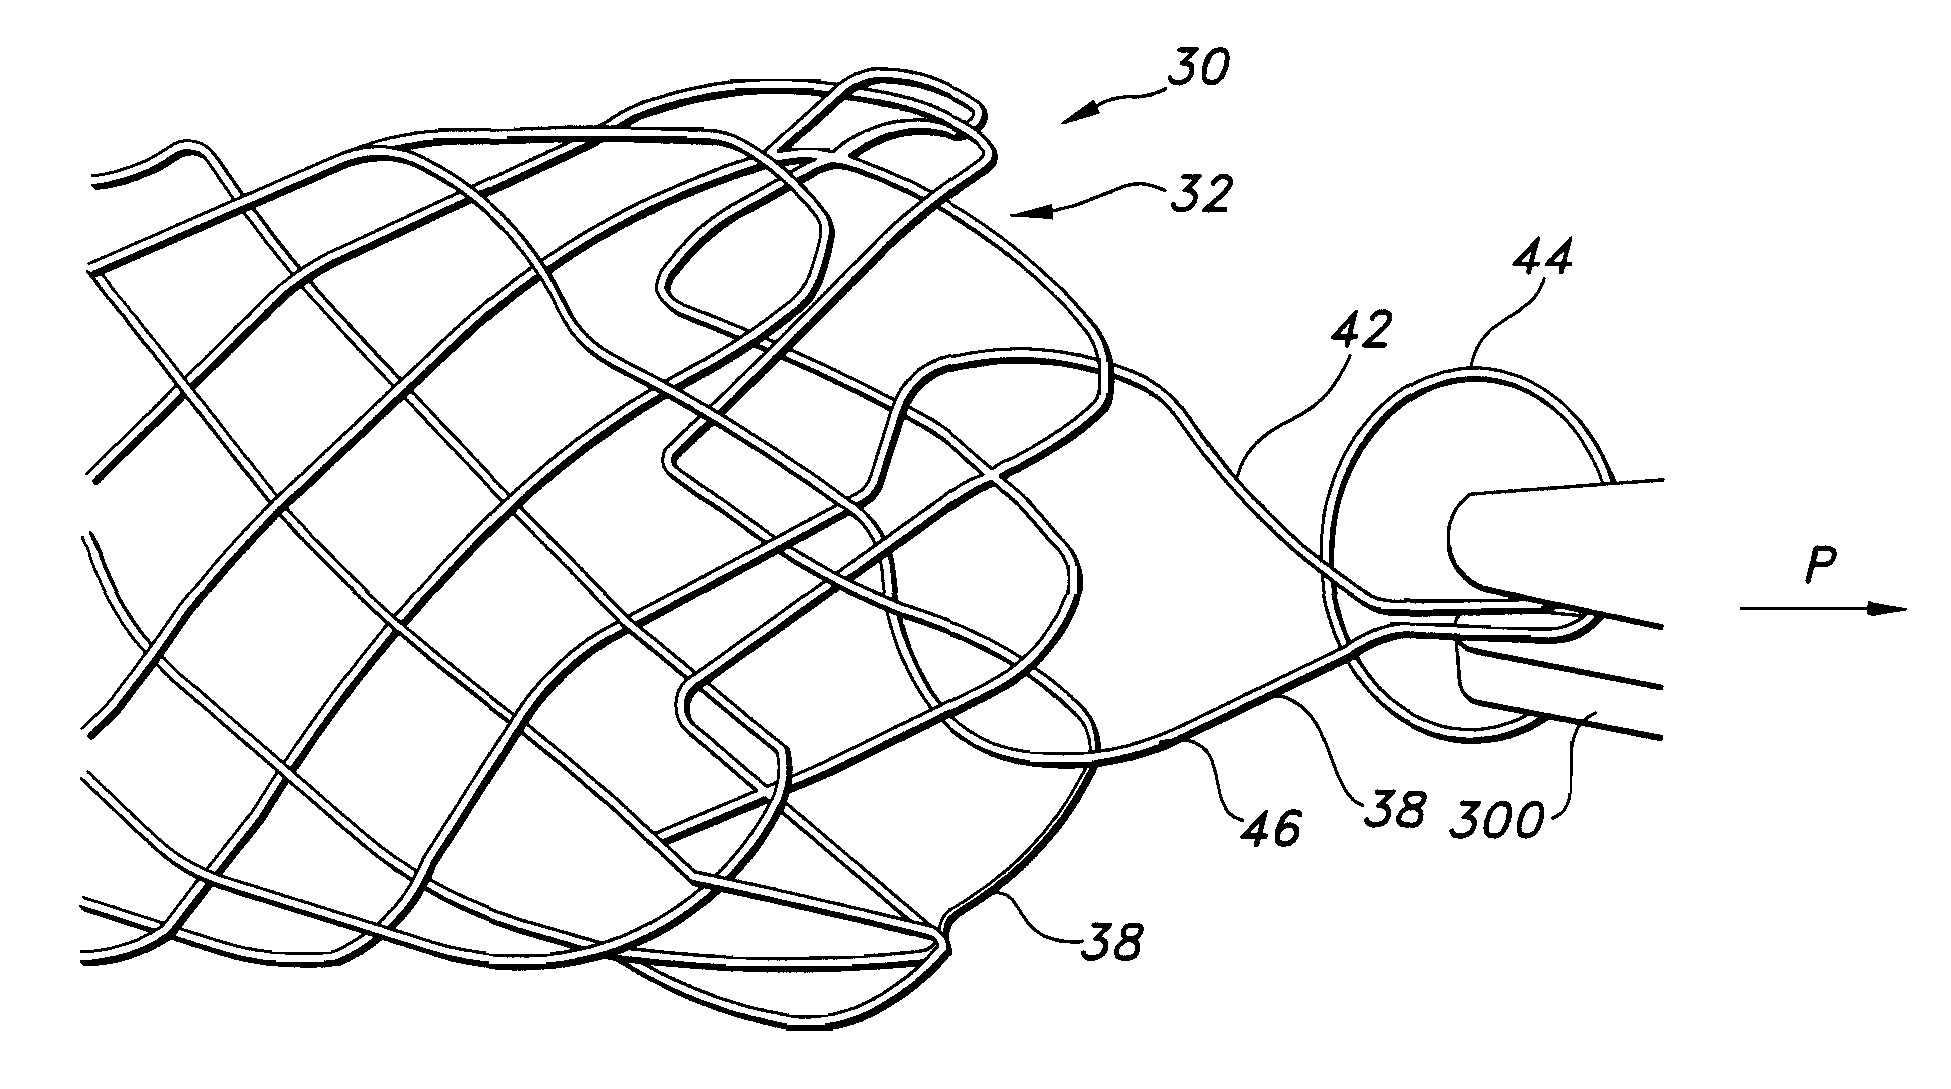 Integrated stent retrieval loop adapted for snare removal and/or optimized purse stringing